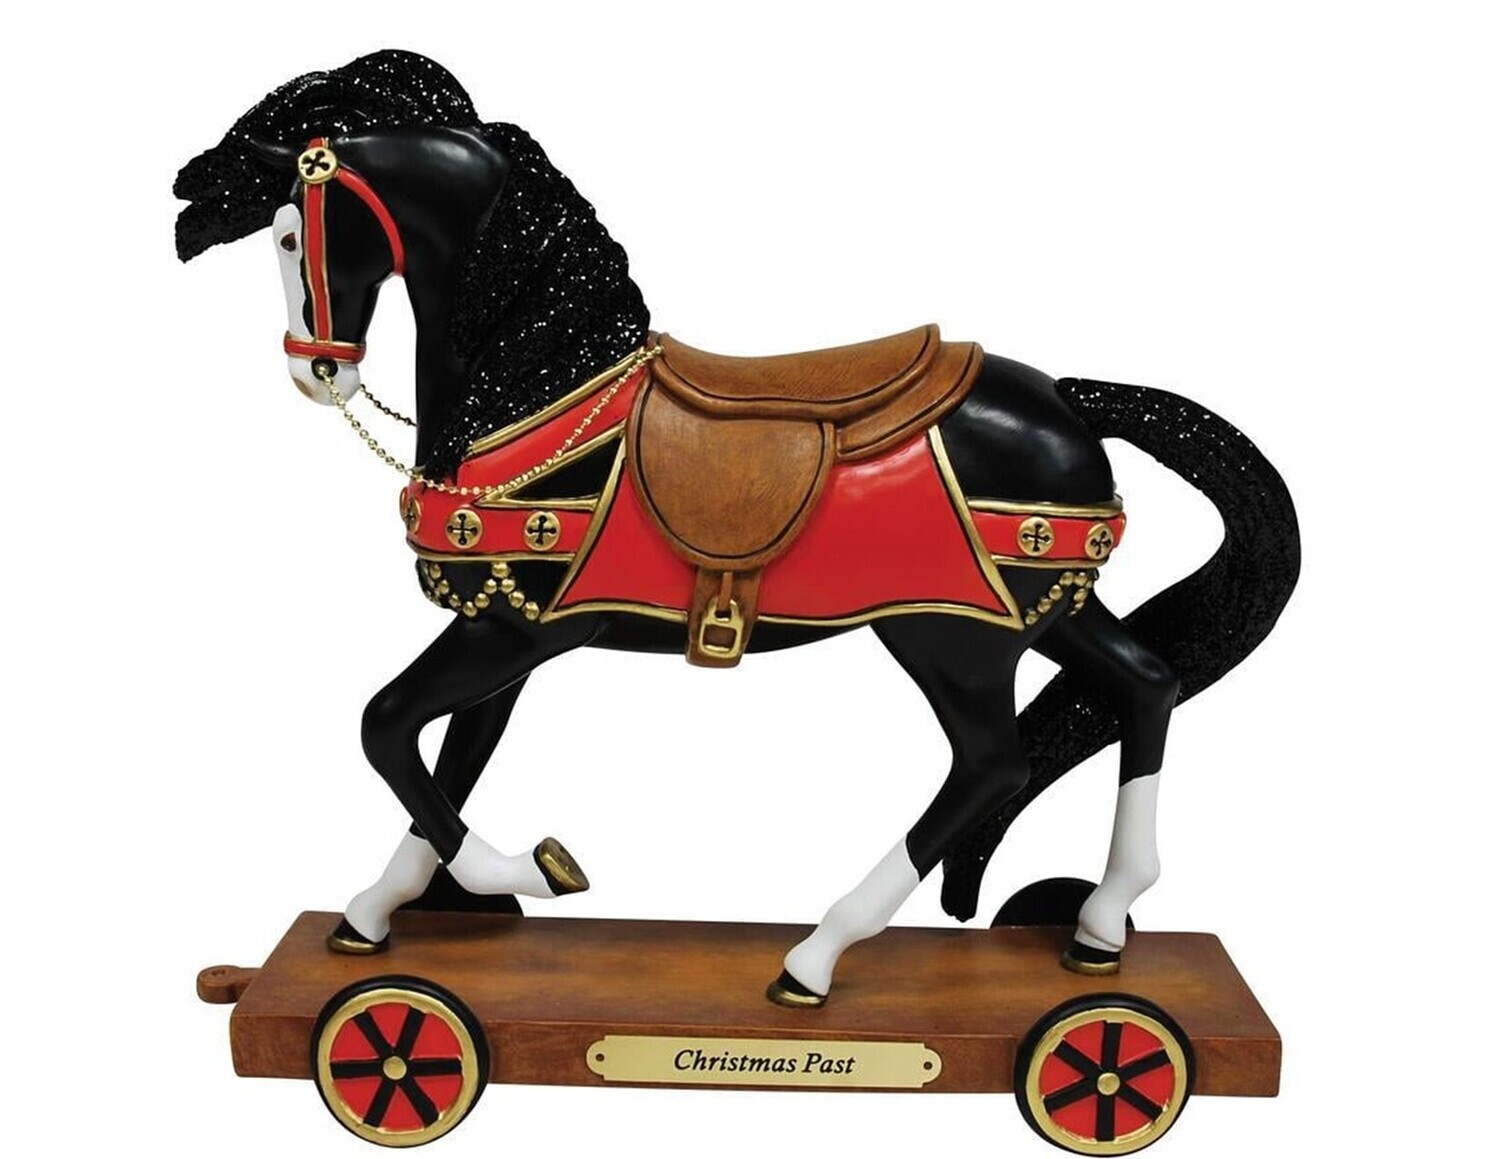 The Trail of Painted Ponies "Christmas Past" Horse Figurine (6011696)